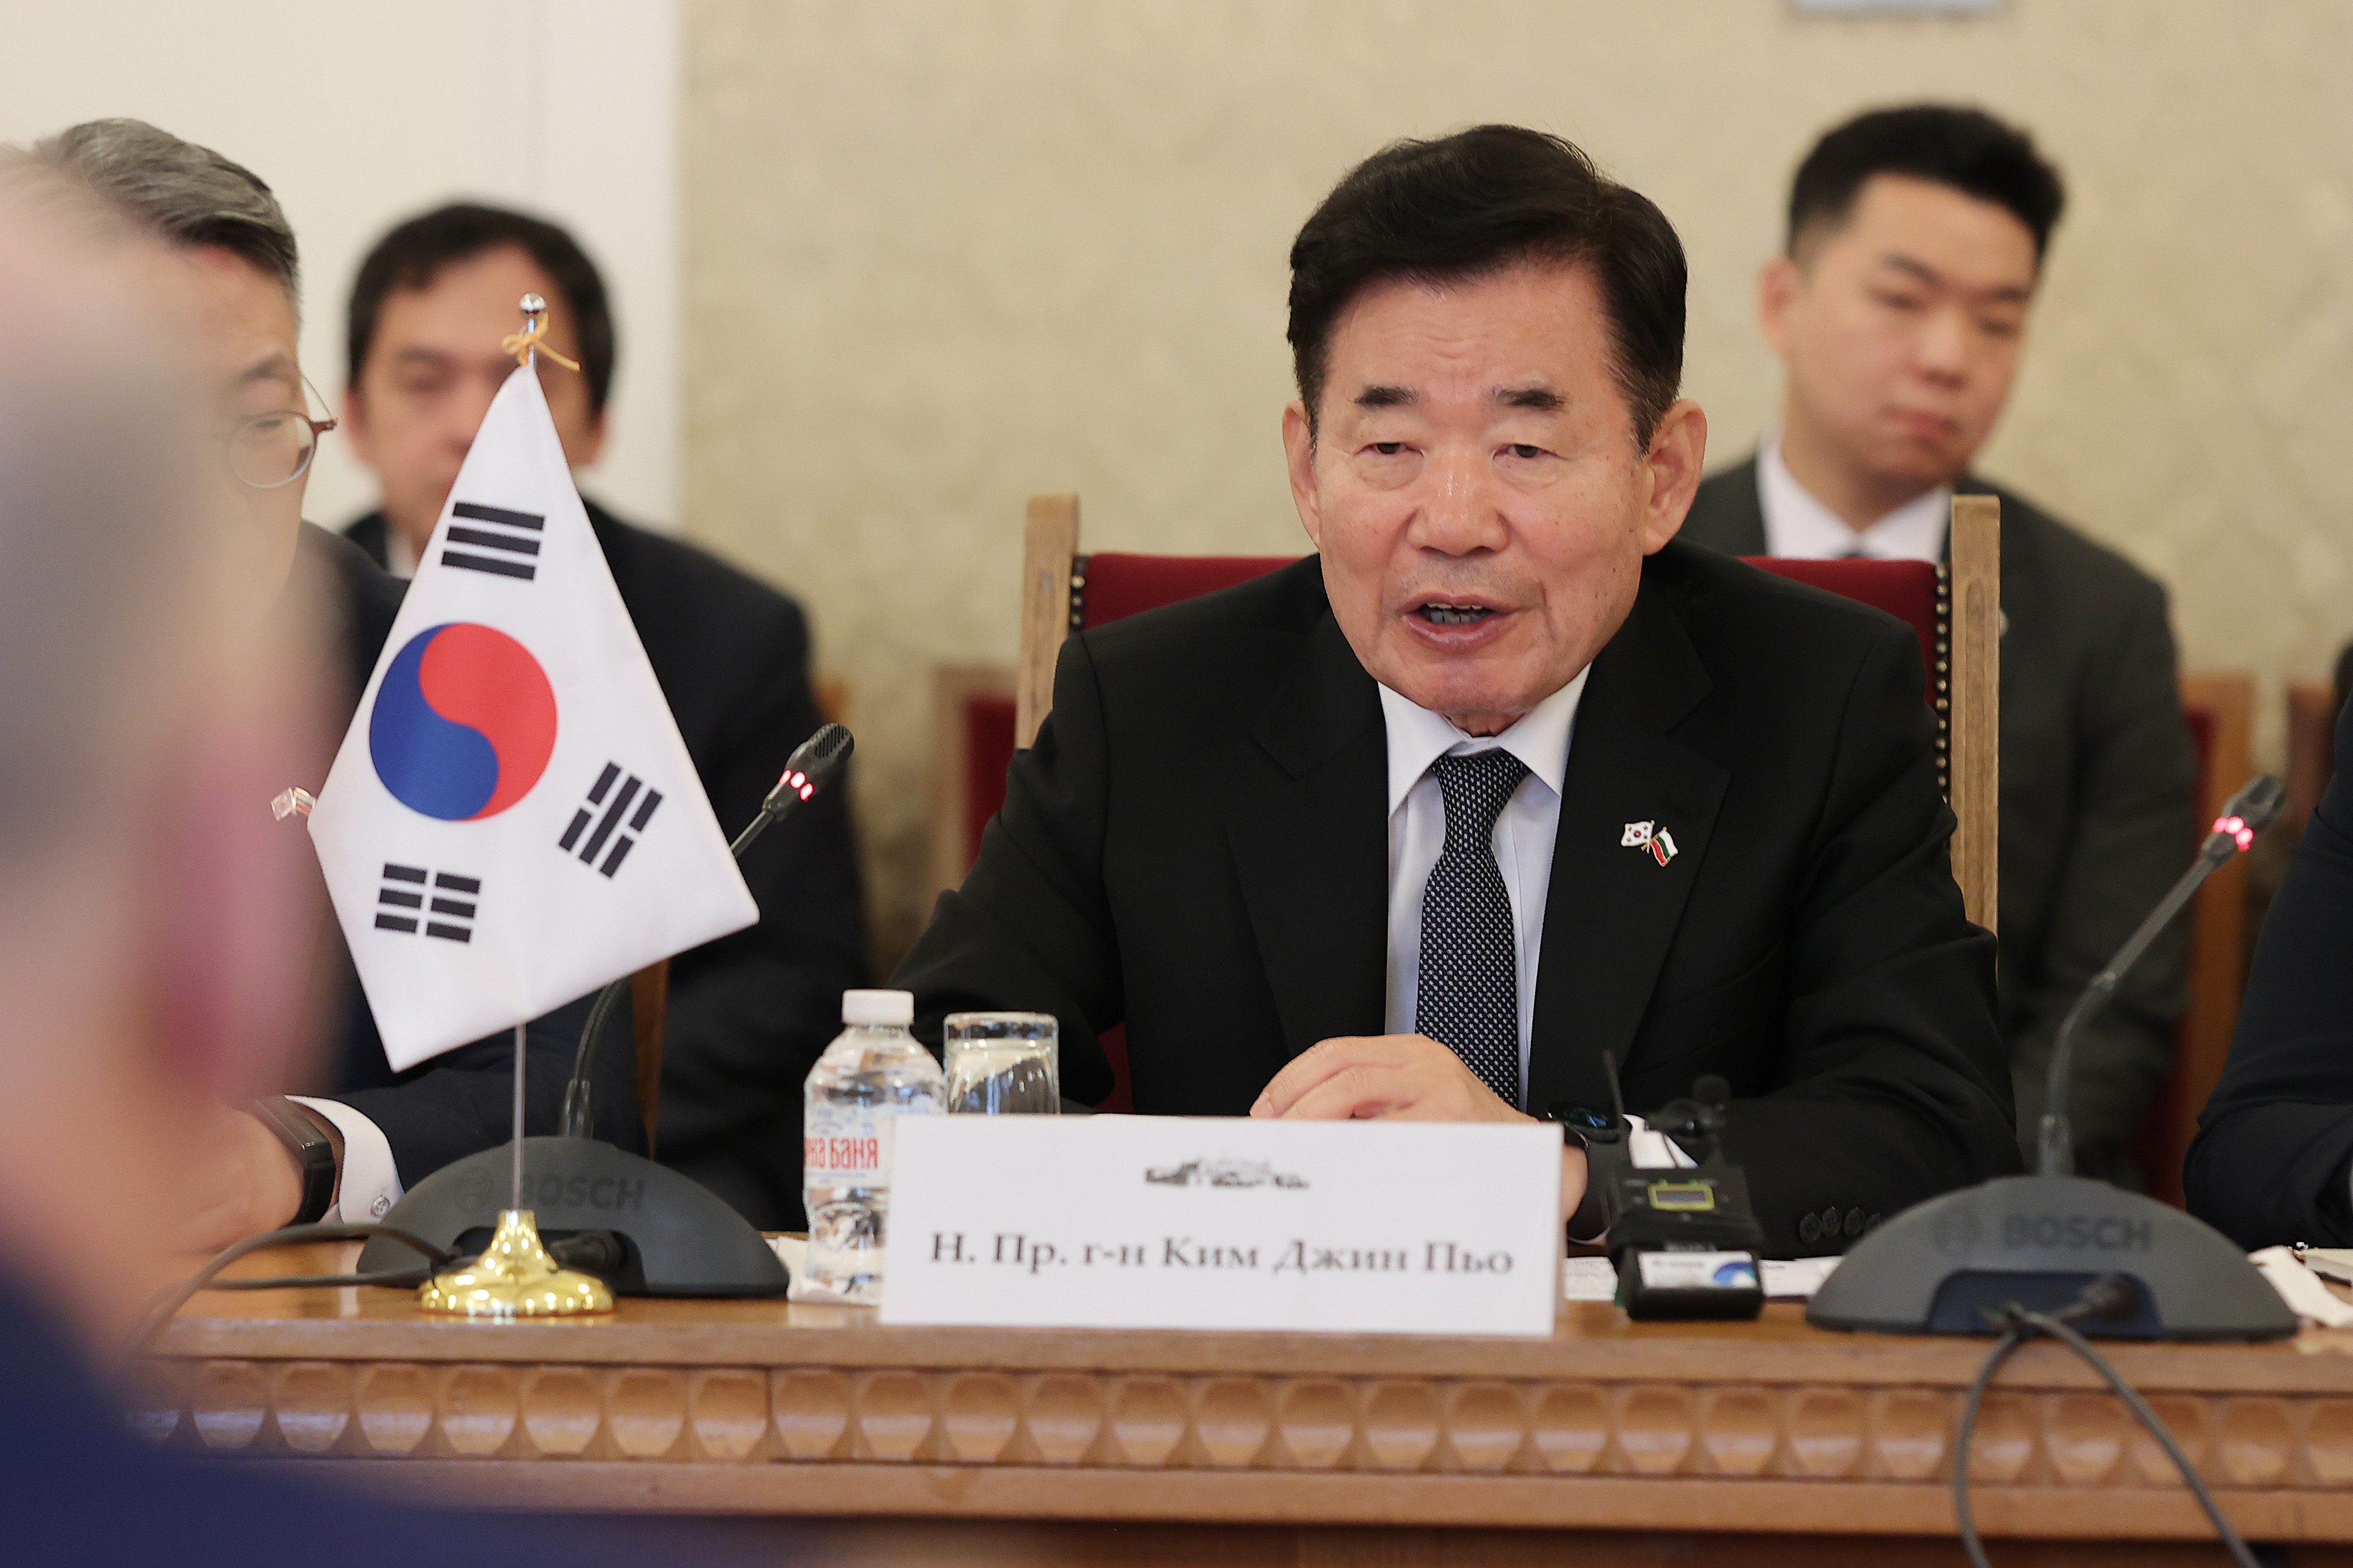 Speaker&rsquo;s economic and sales diplomacy helps Korea win Bulgarian nuclear power plant project 관련사진 8 보기